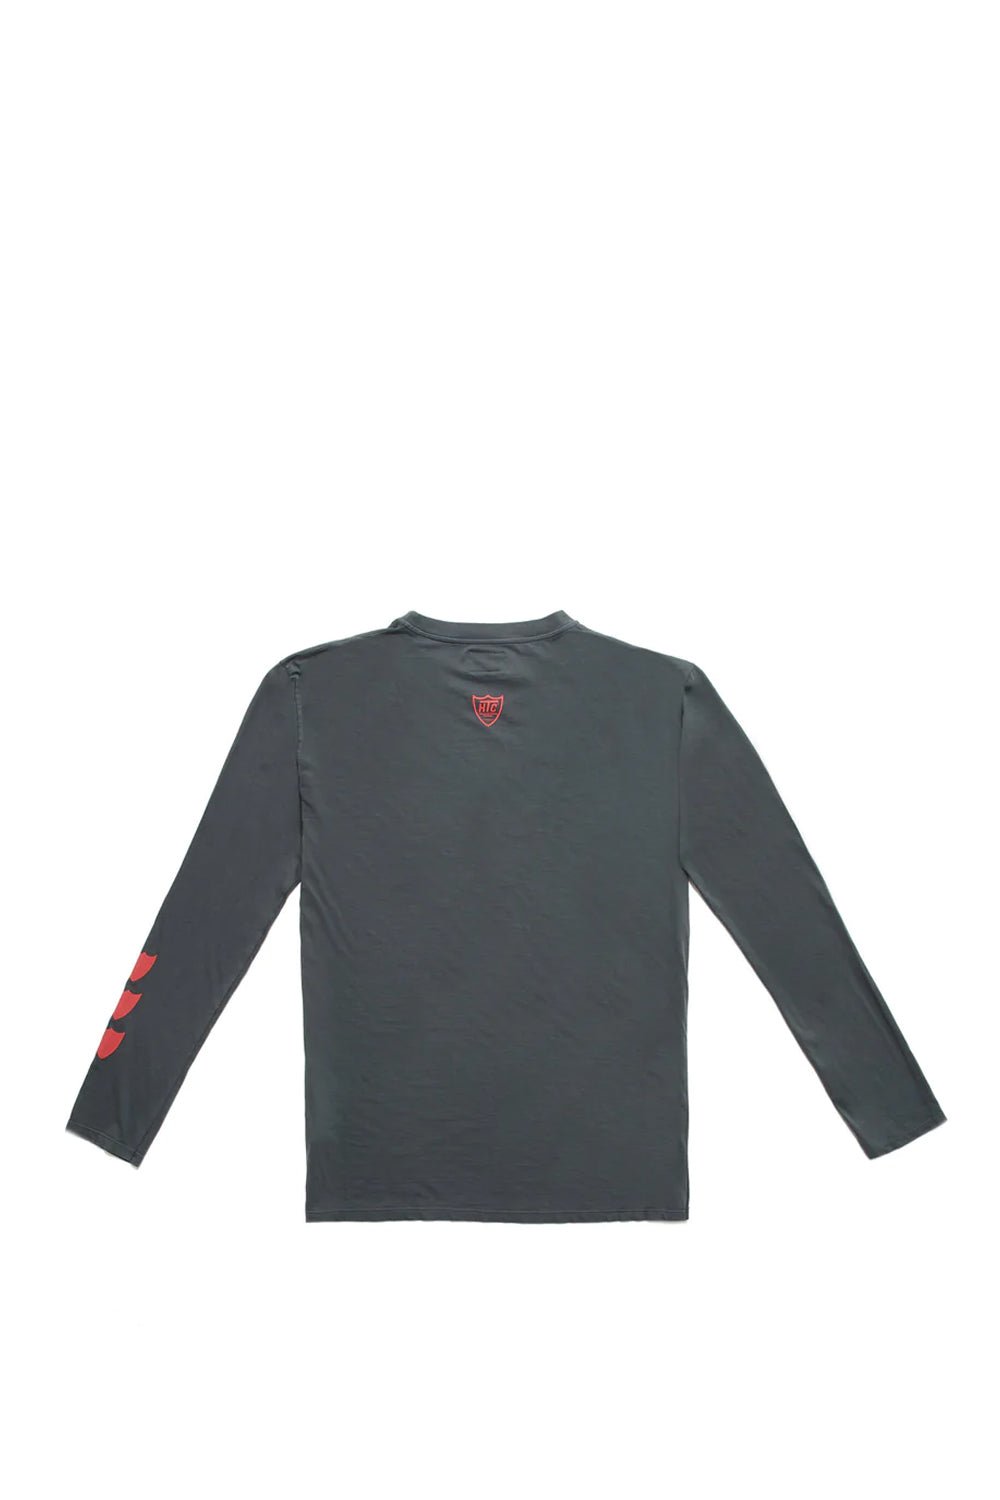 SHIELDS LS T-SHIRT Regular fit long sleeve t-shirt with logo prints on the sleeve. HTC LOS ANGELES